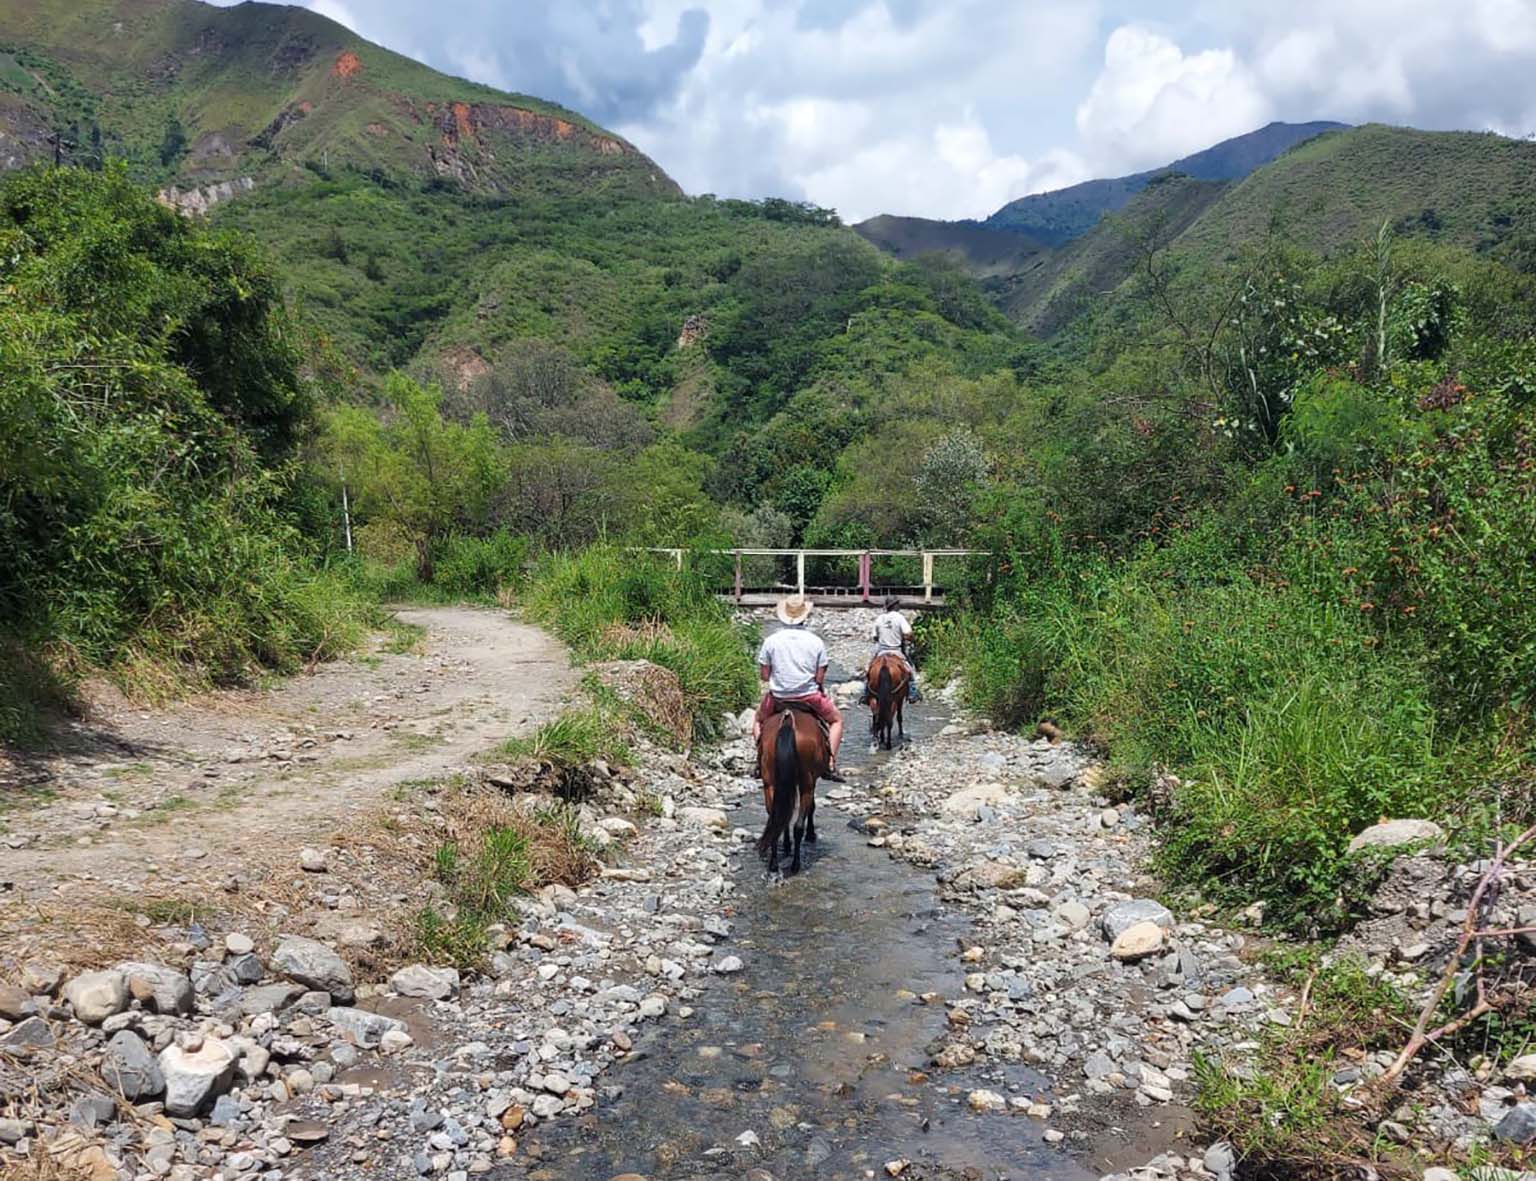 Matt Gibson (left) and colleague ride up a rocky stream on horseback.  A foot bridge crosses the stream ahead of them. The Andes Mountains are seen in the background.